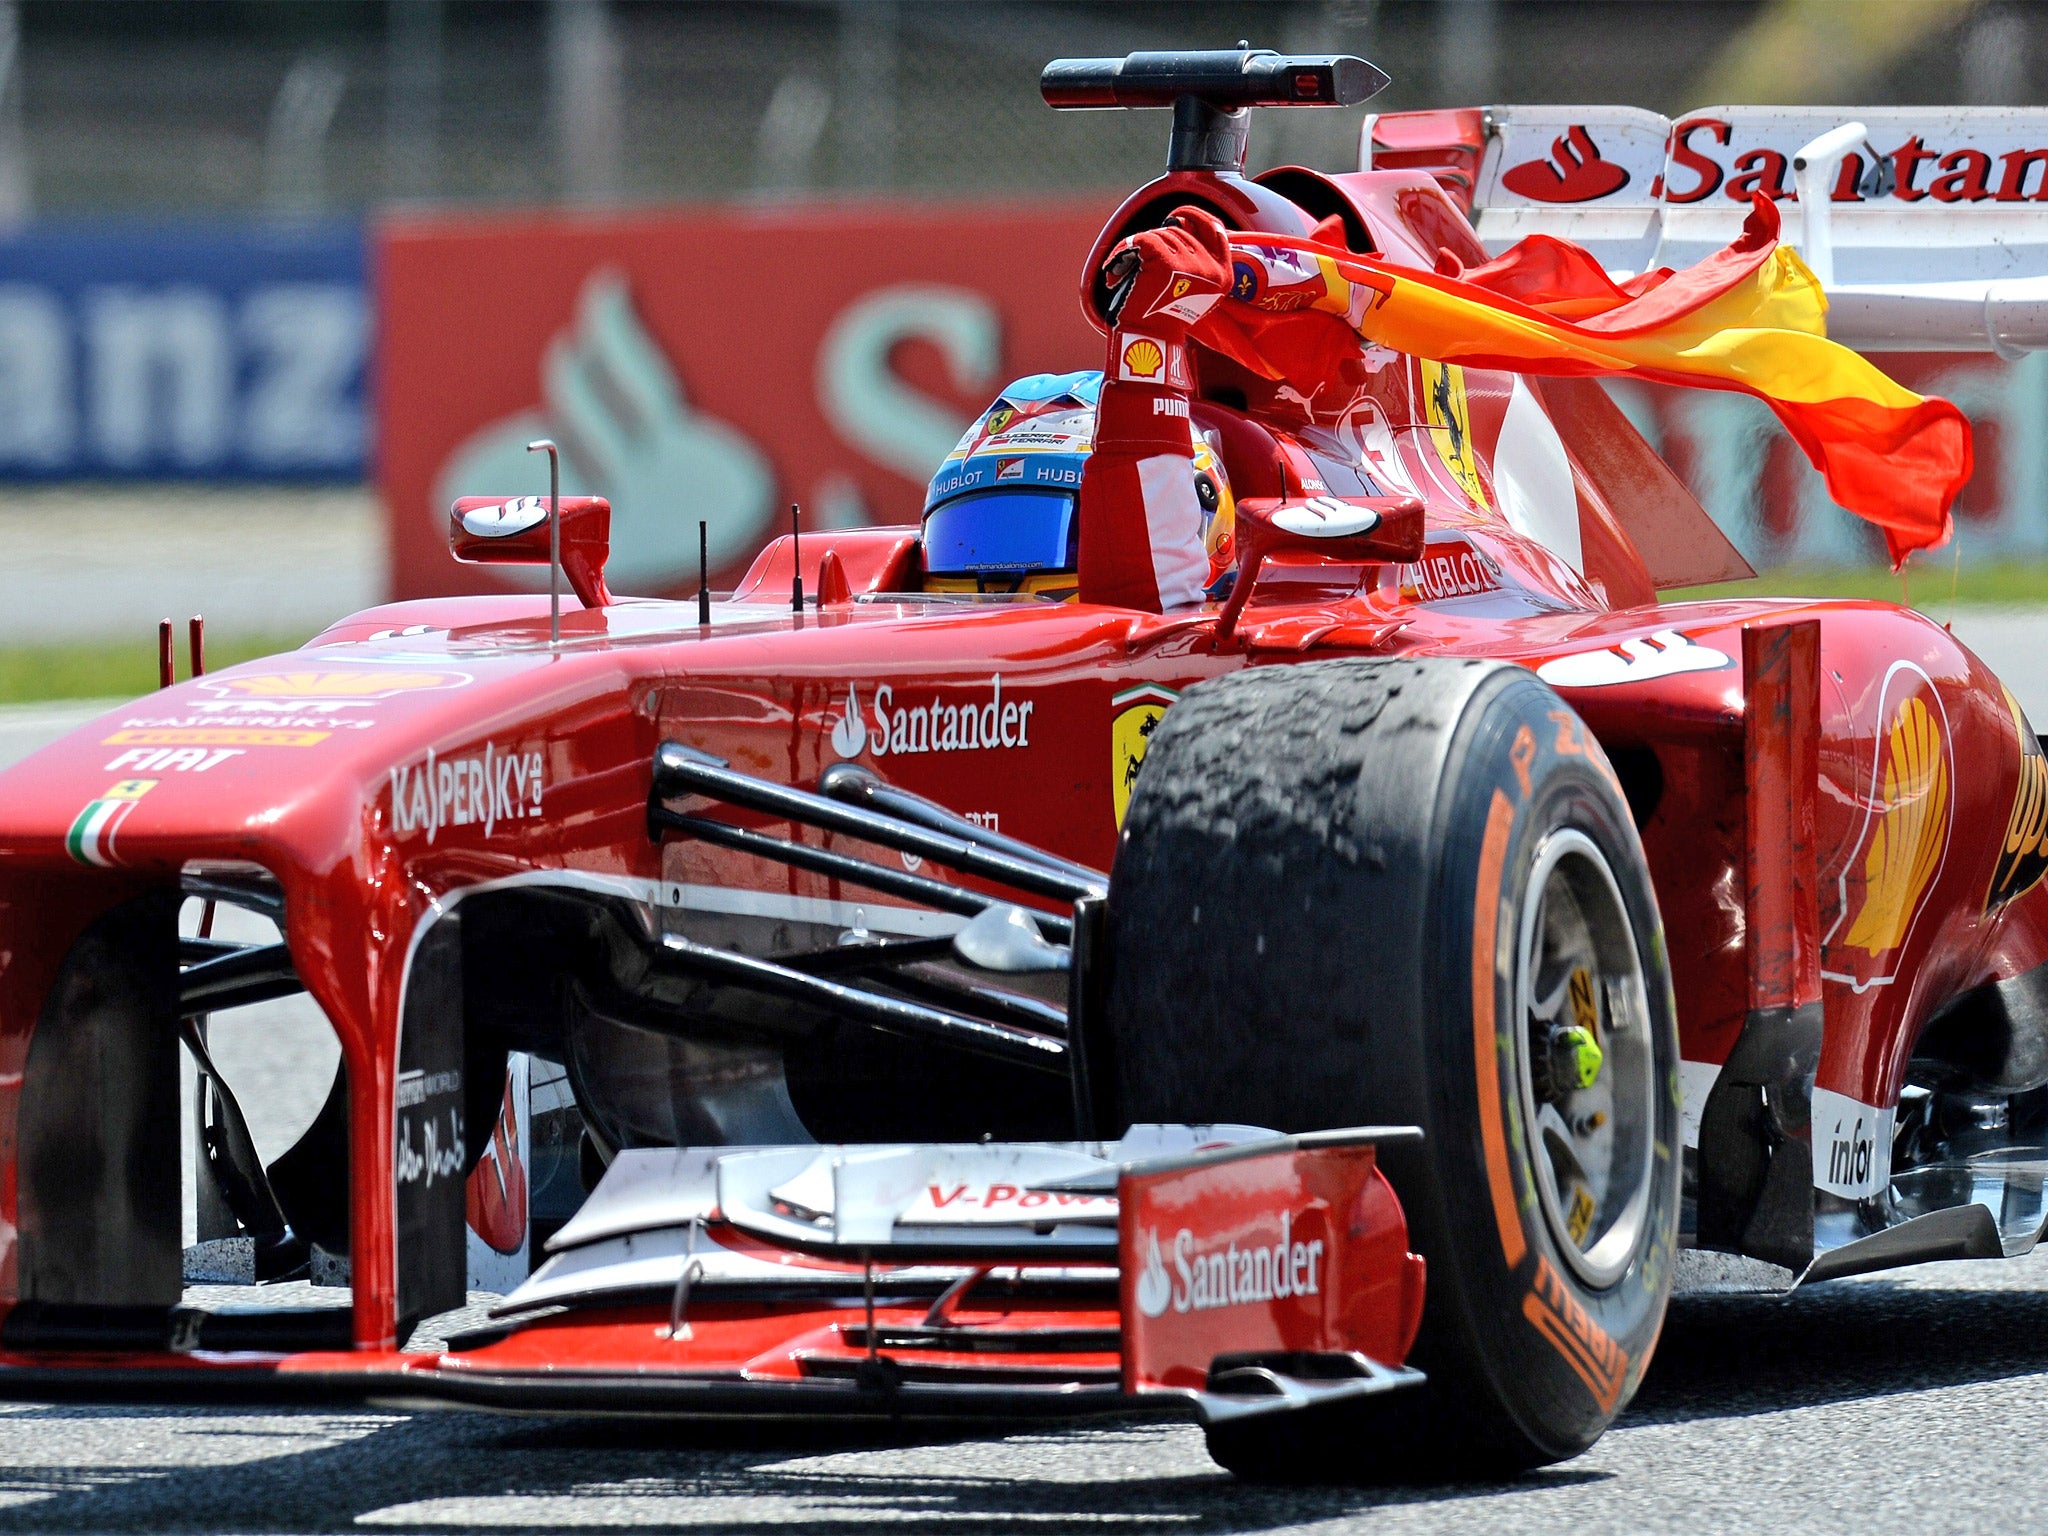 Fernando Alonso after winning the Spanish Grand Prix on Sunday, with a battered front tyre clearly visible